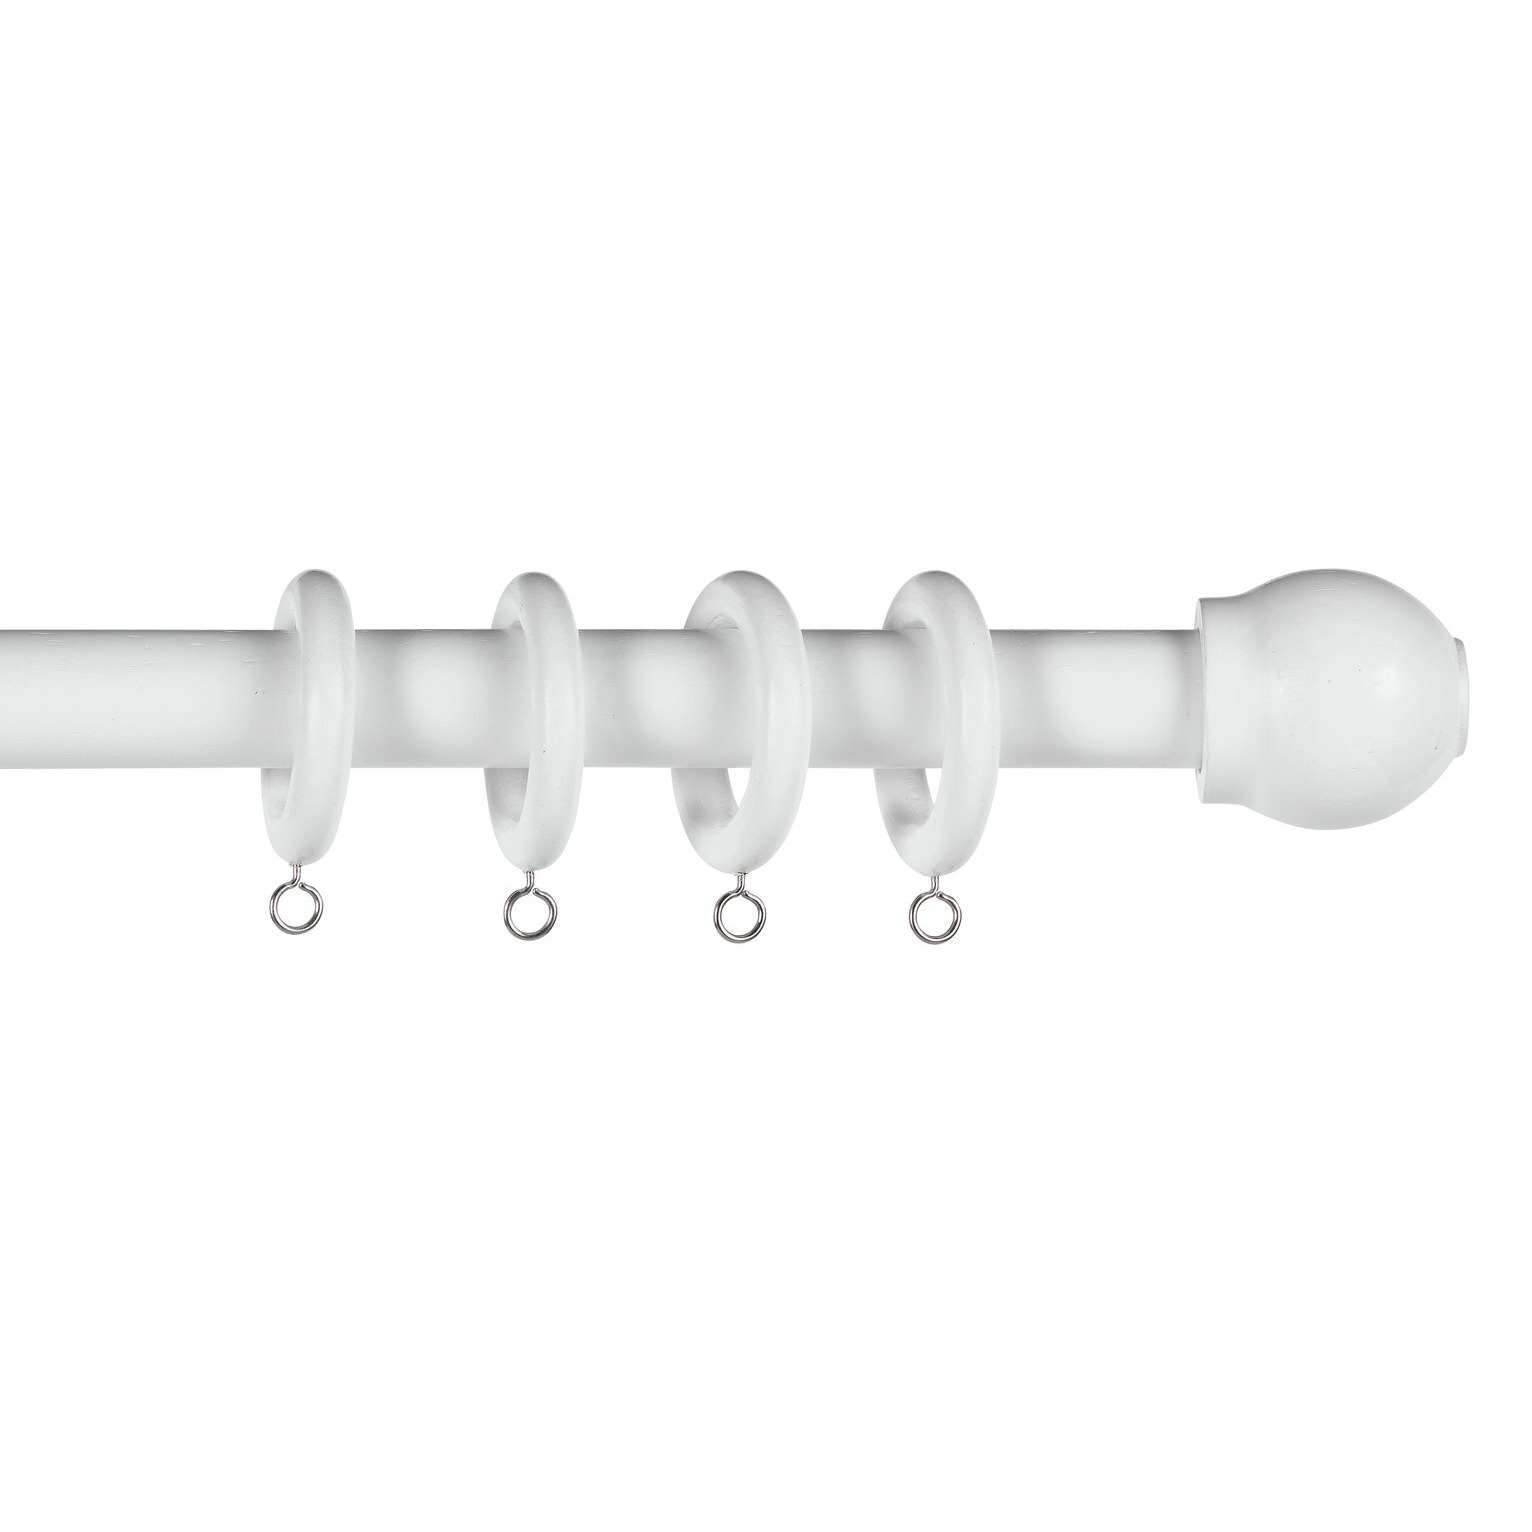 Home Essentials 1.2m Wooden Curtain Pole - White - image 1